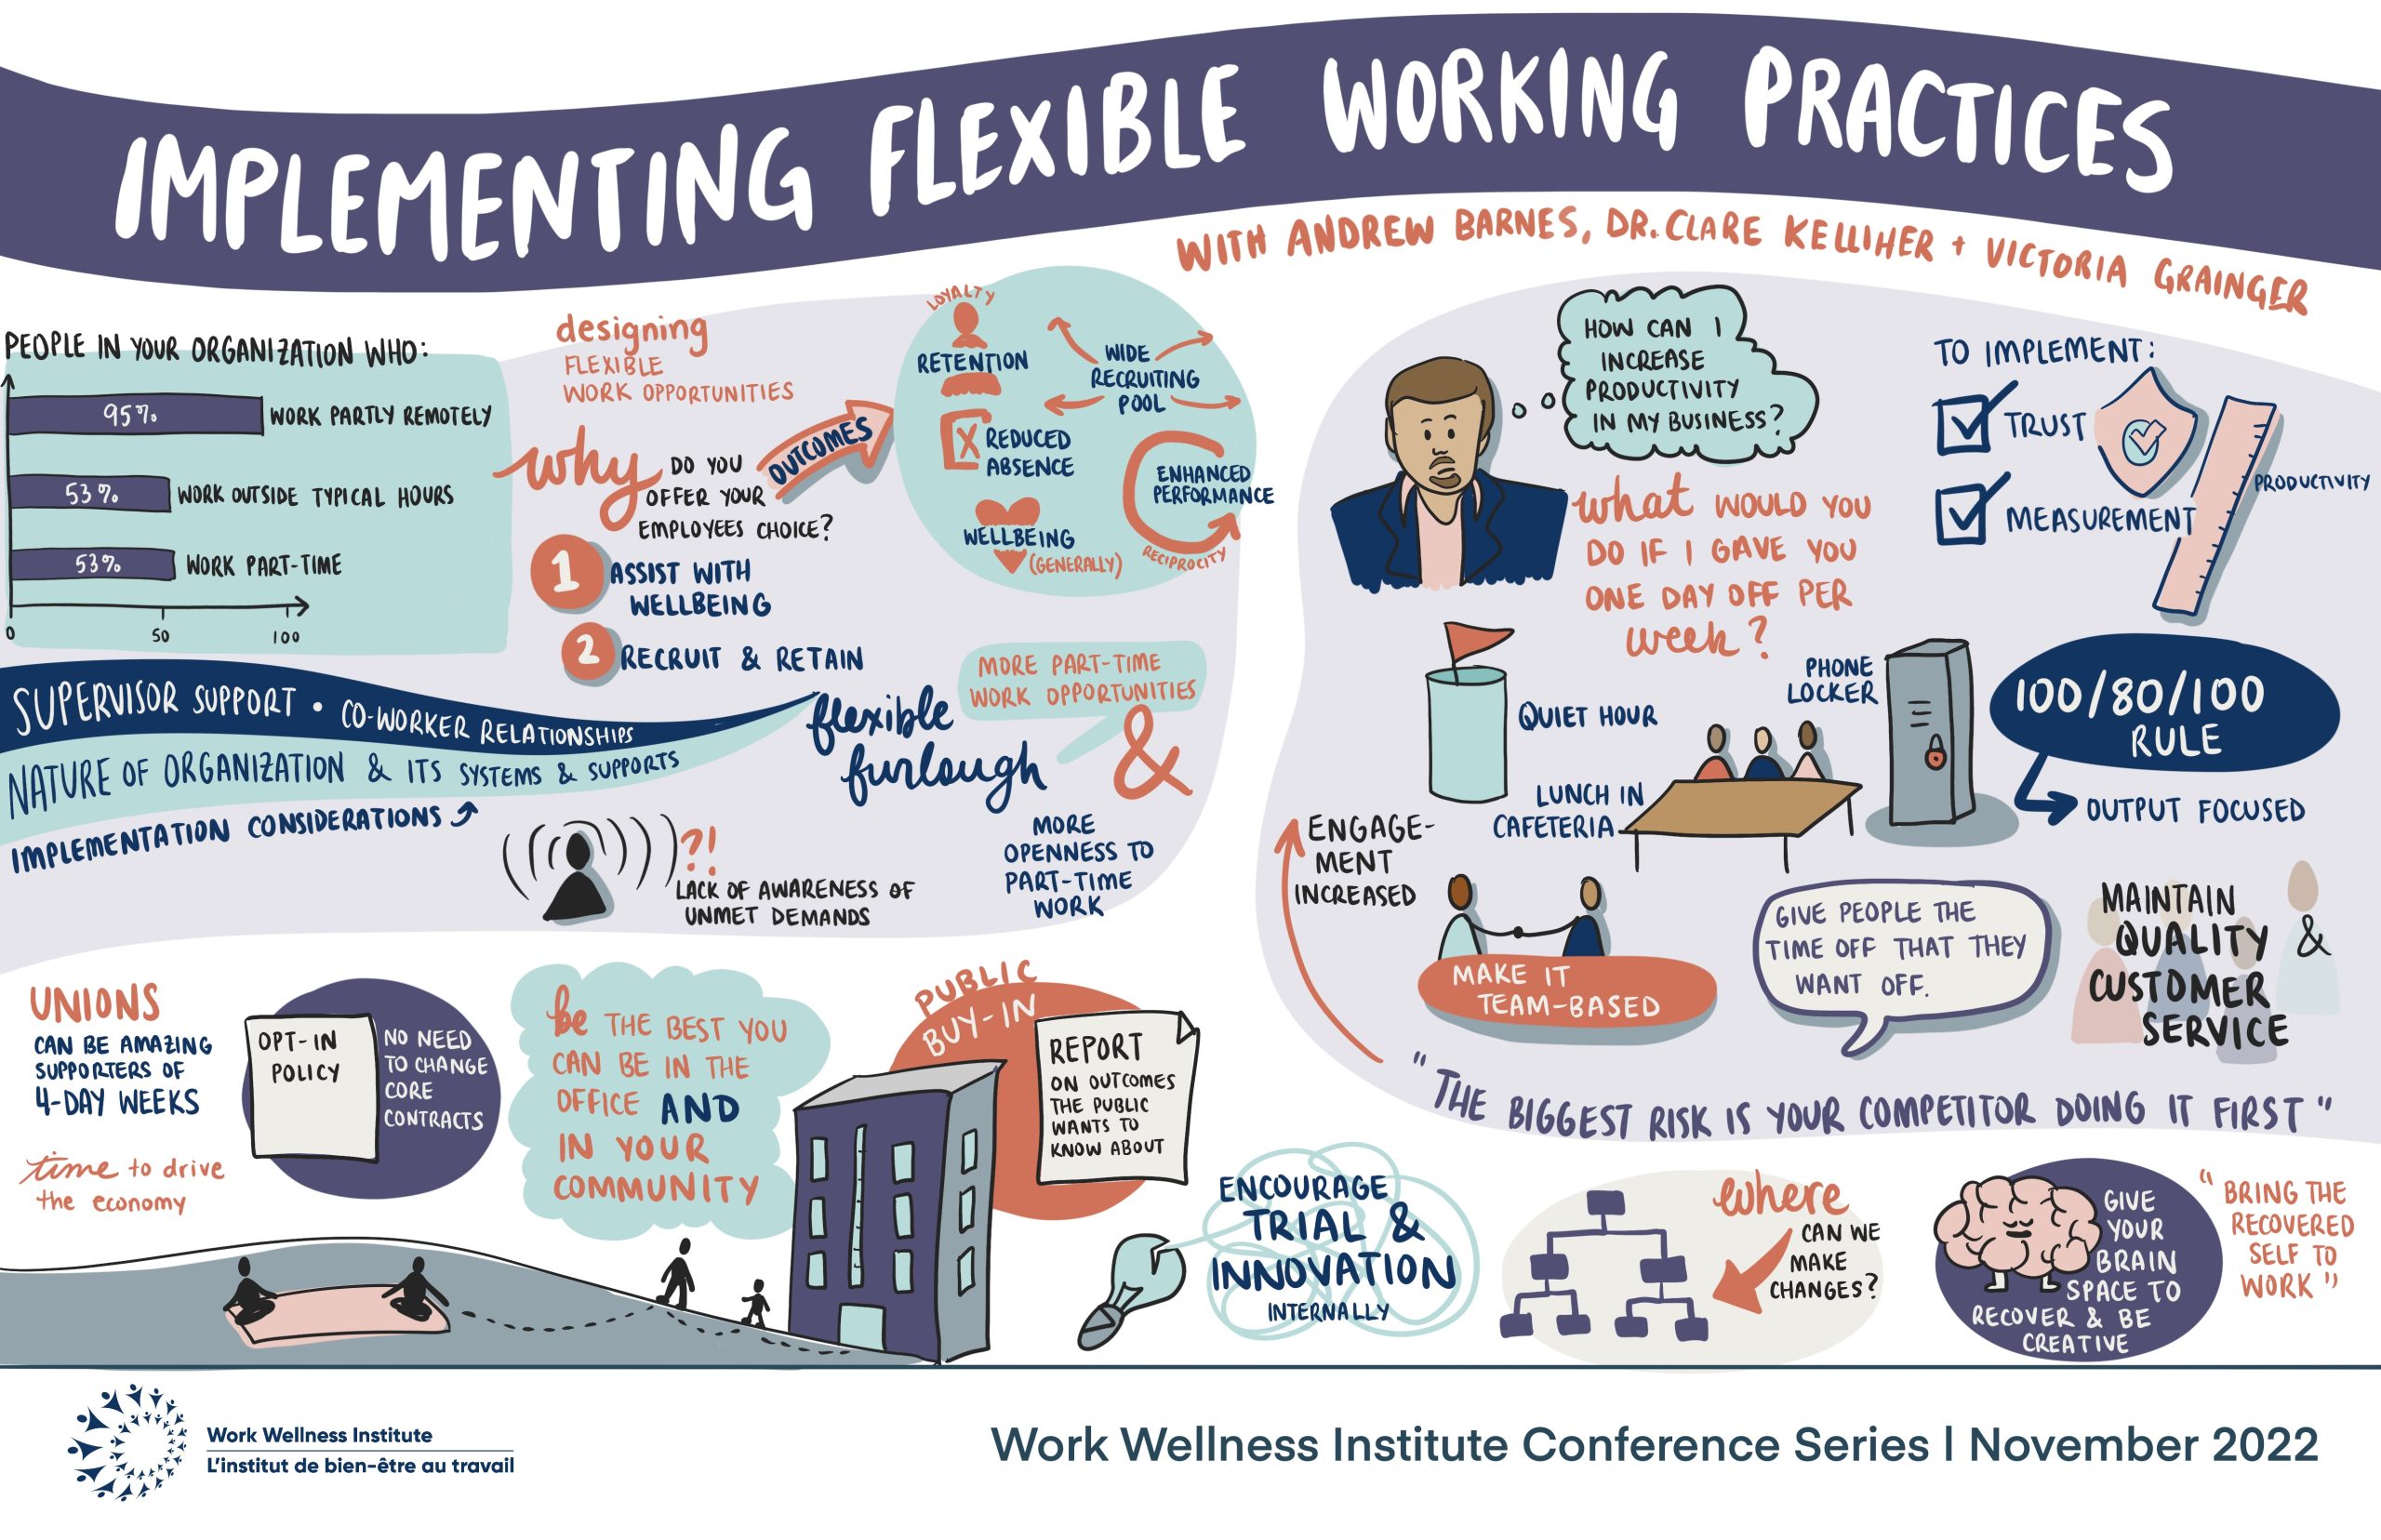 Implementing flexible working practices